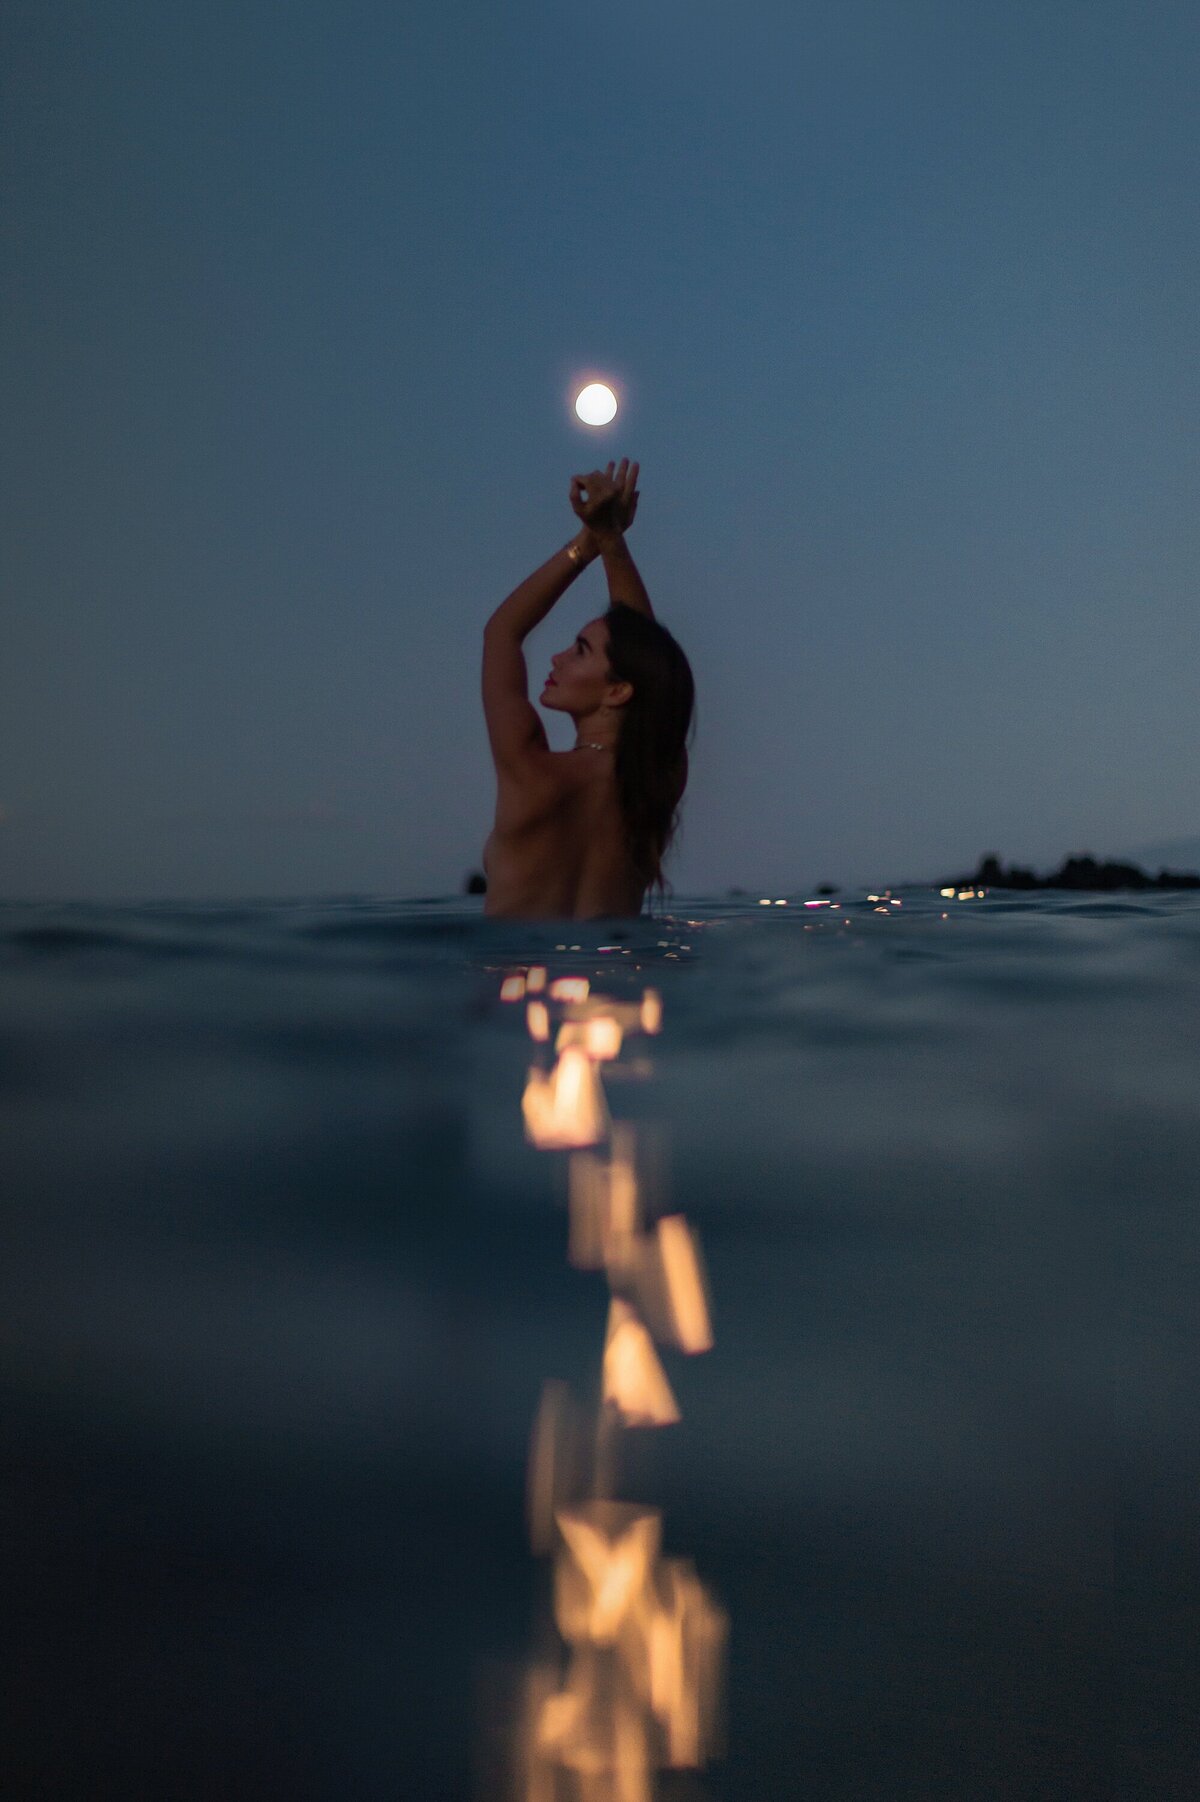 Stunning dark portrait of a woman posing in the water under the moon in Maui